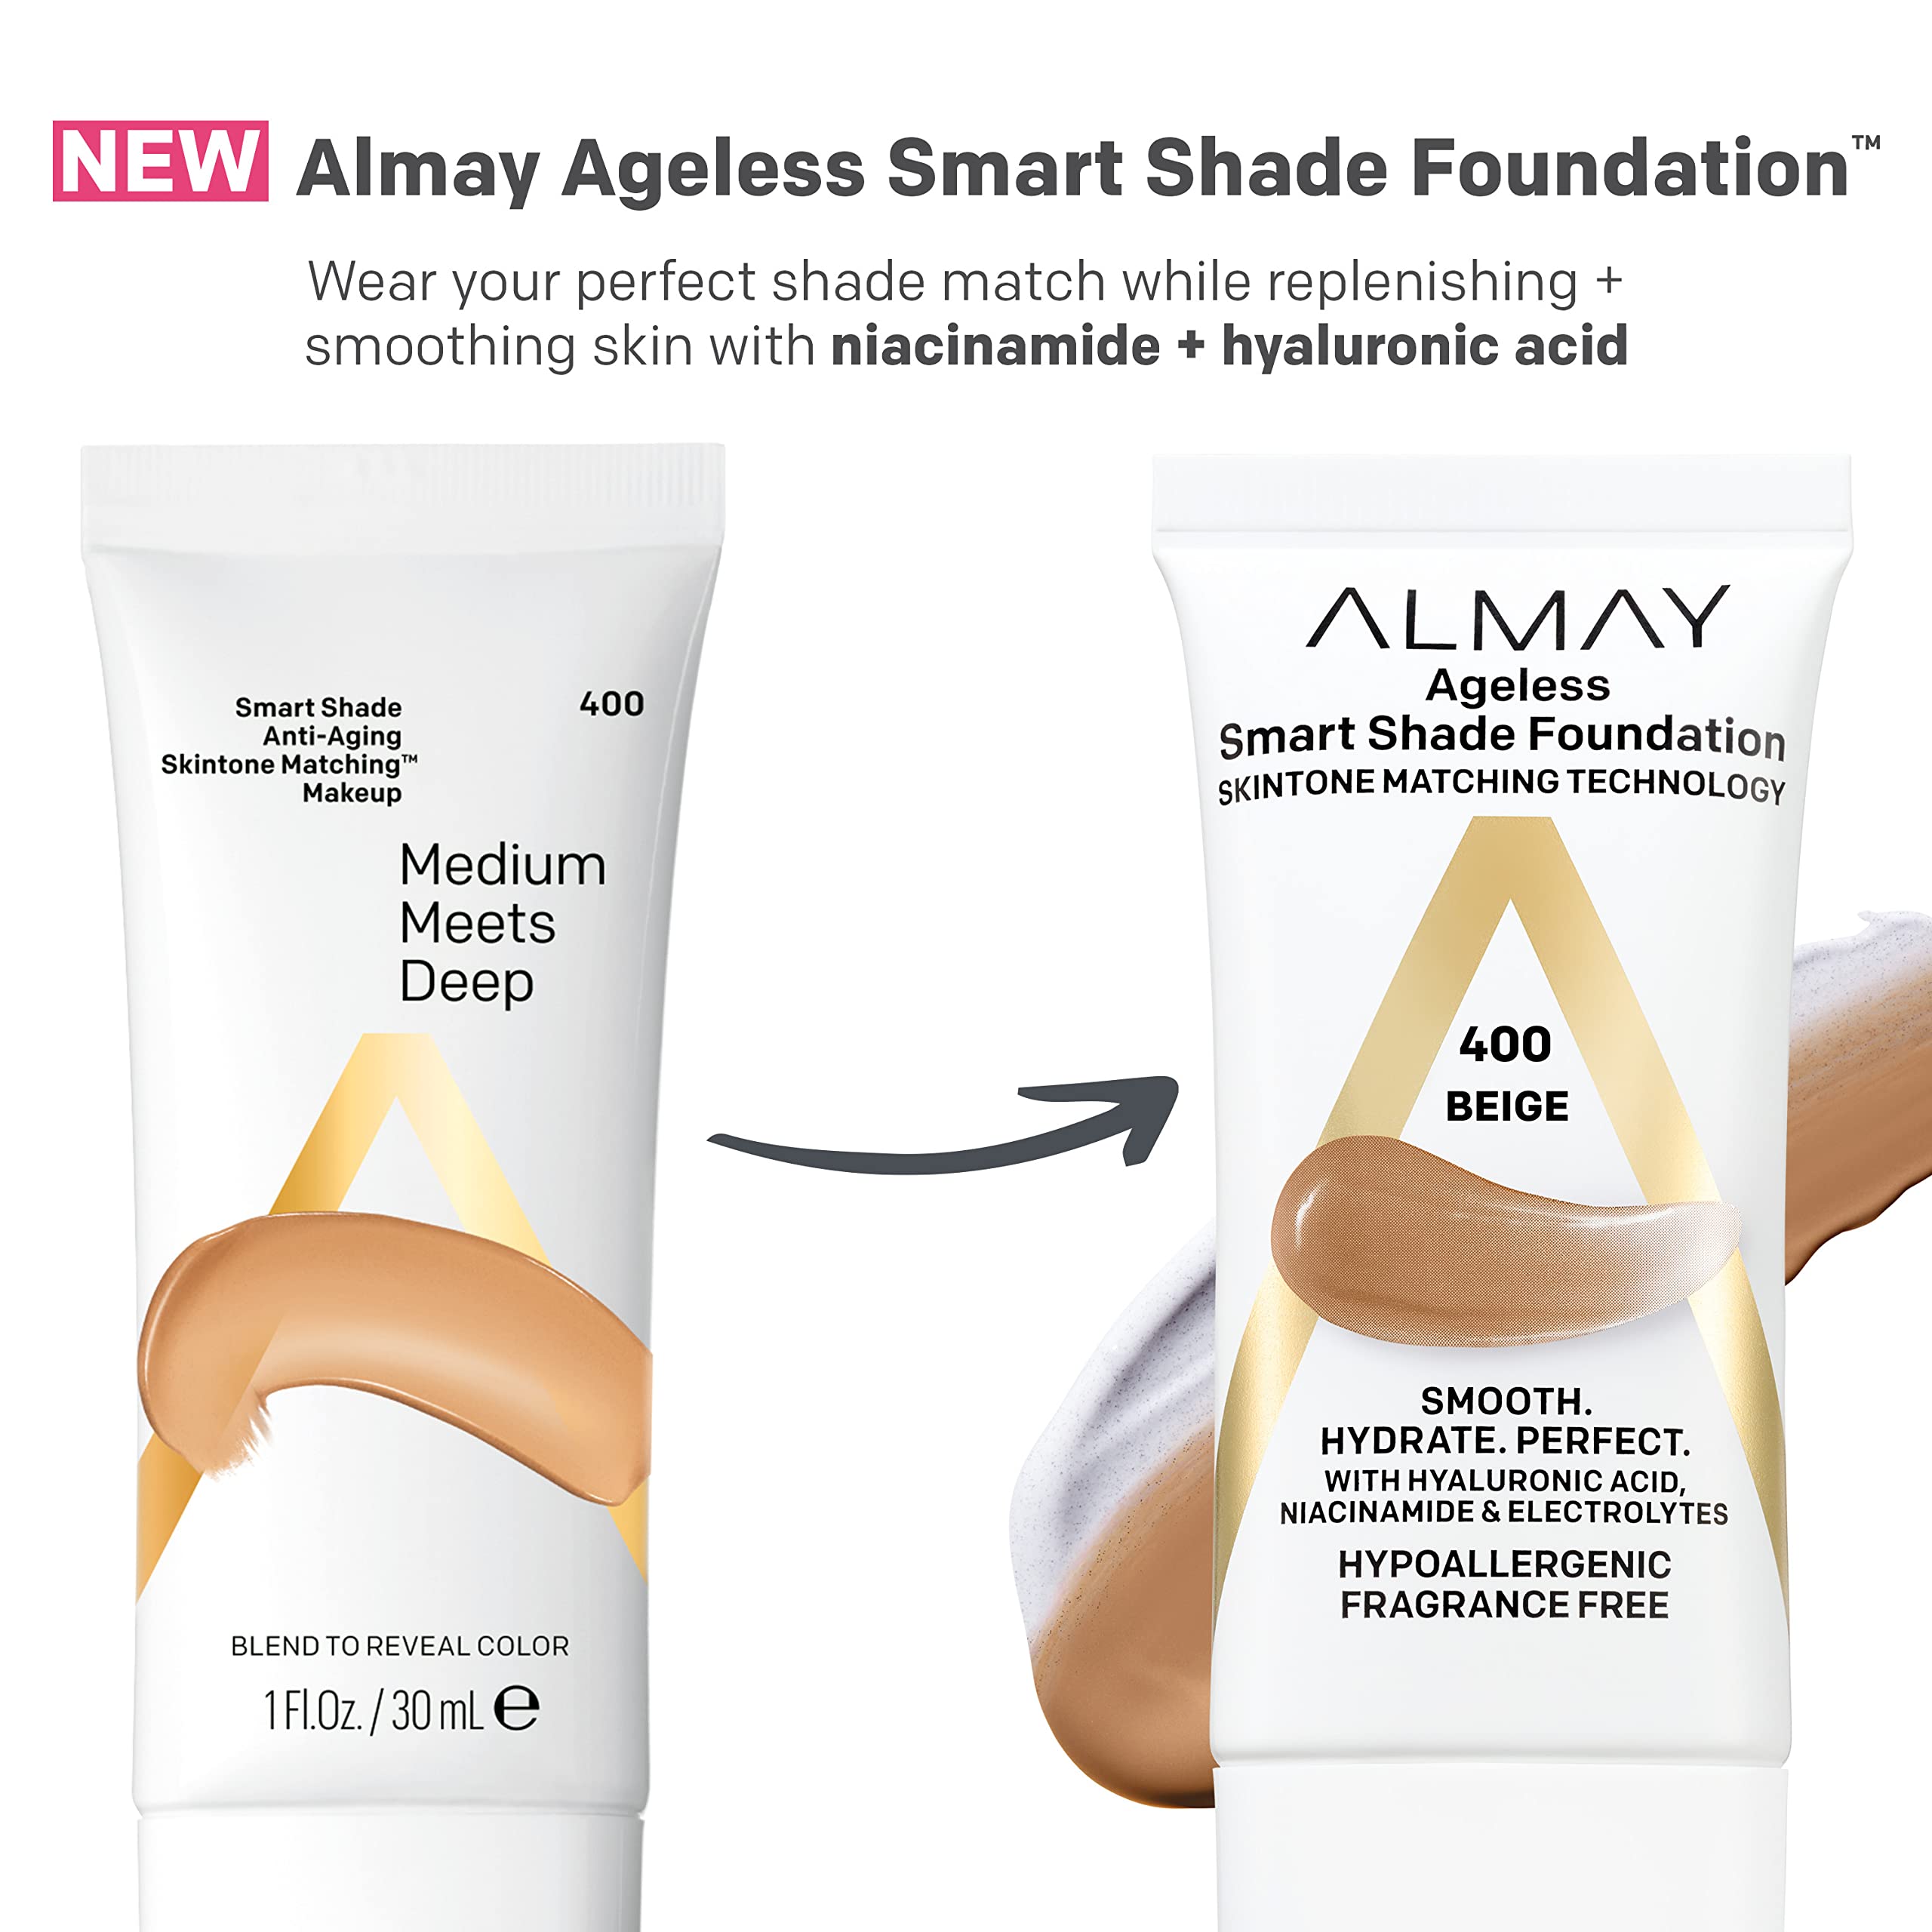 Anti-Aging Foundation by Almay, Smart Shade Face Makeup with Hyaluronic Acid, Niacinamide, Vitamin C & E, Hypoallergenic-Fragrance Free, 300 Medium, 1 Fl Oz (Pack of 1)